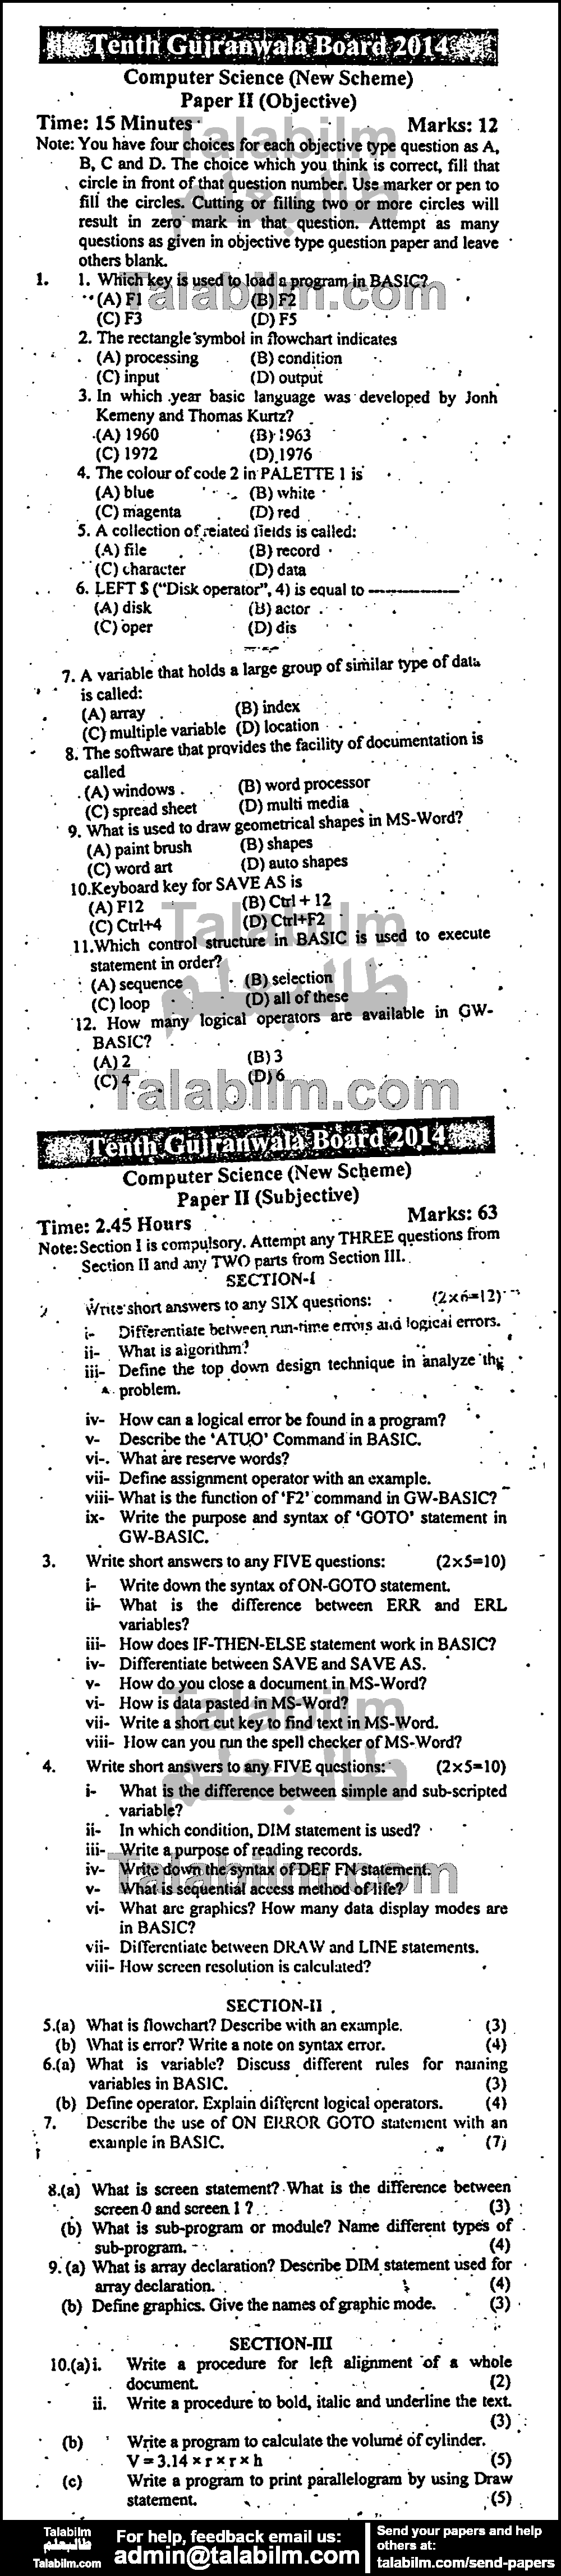 Computer Science 0 past paper for English Medium 2014 Group-I